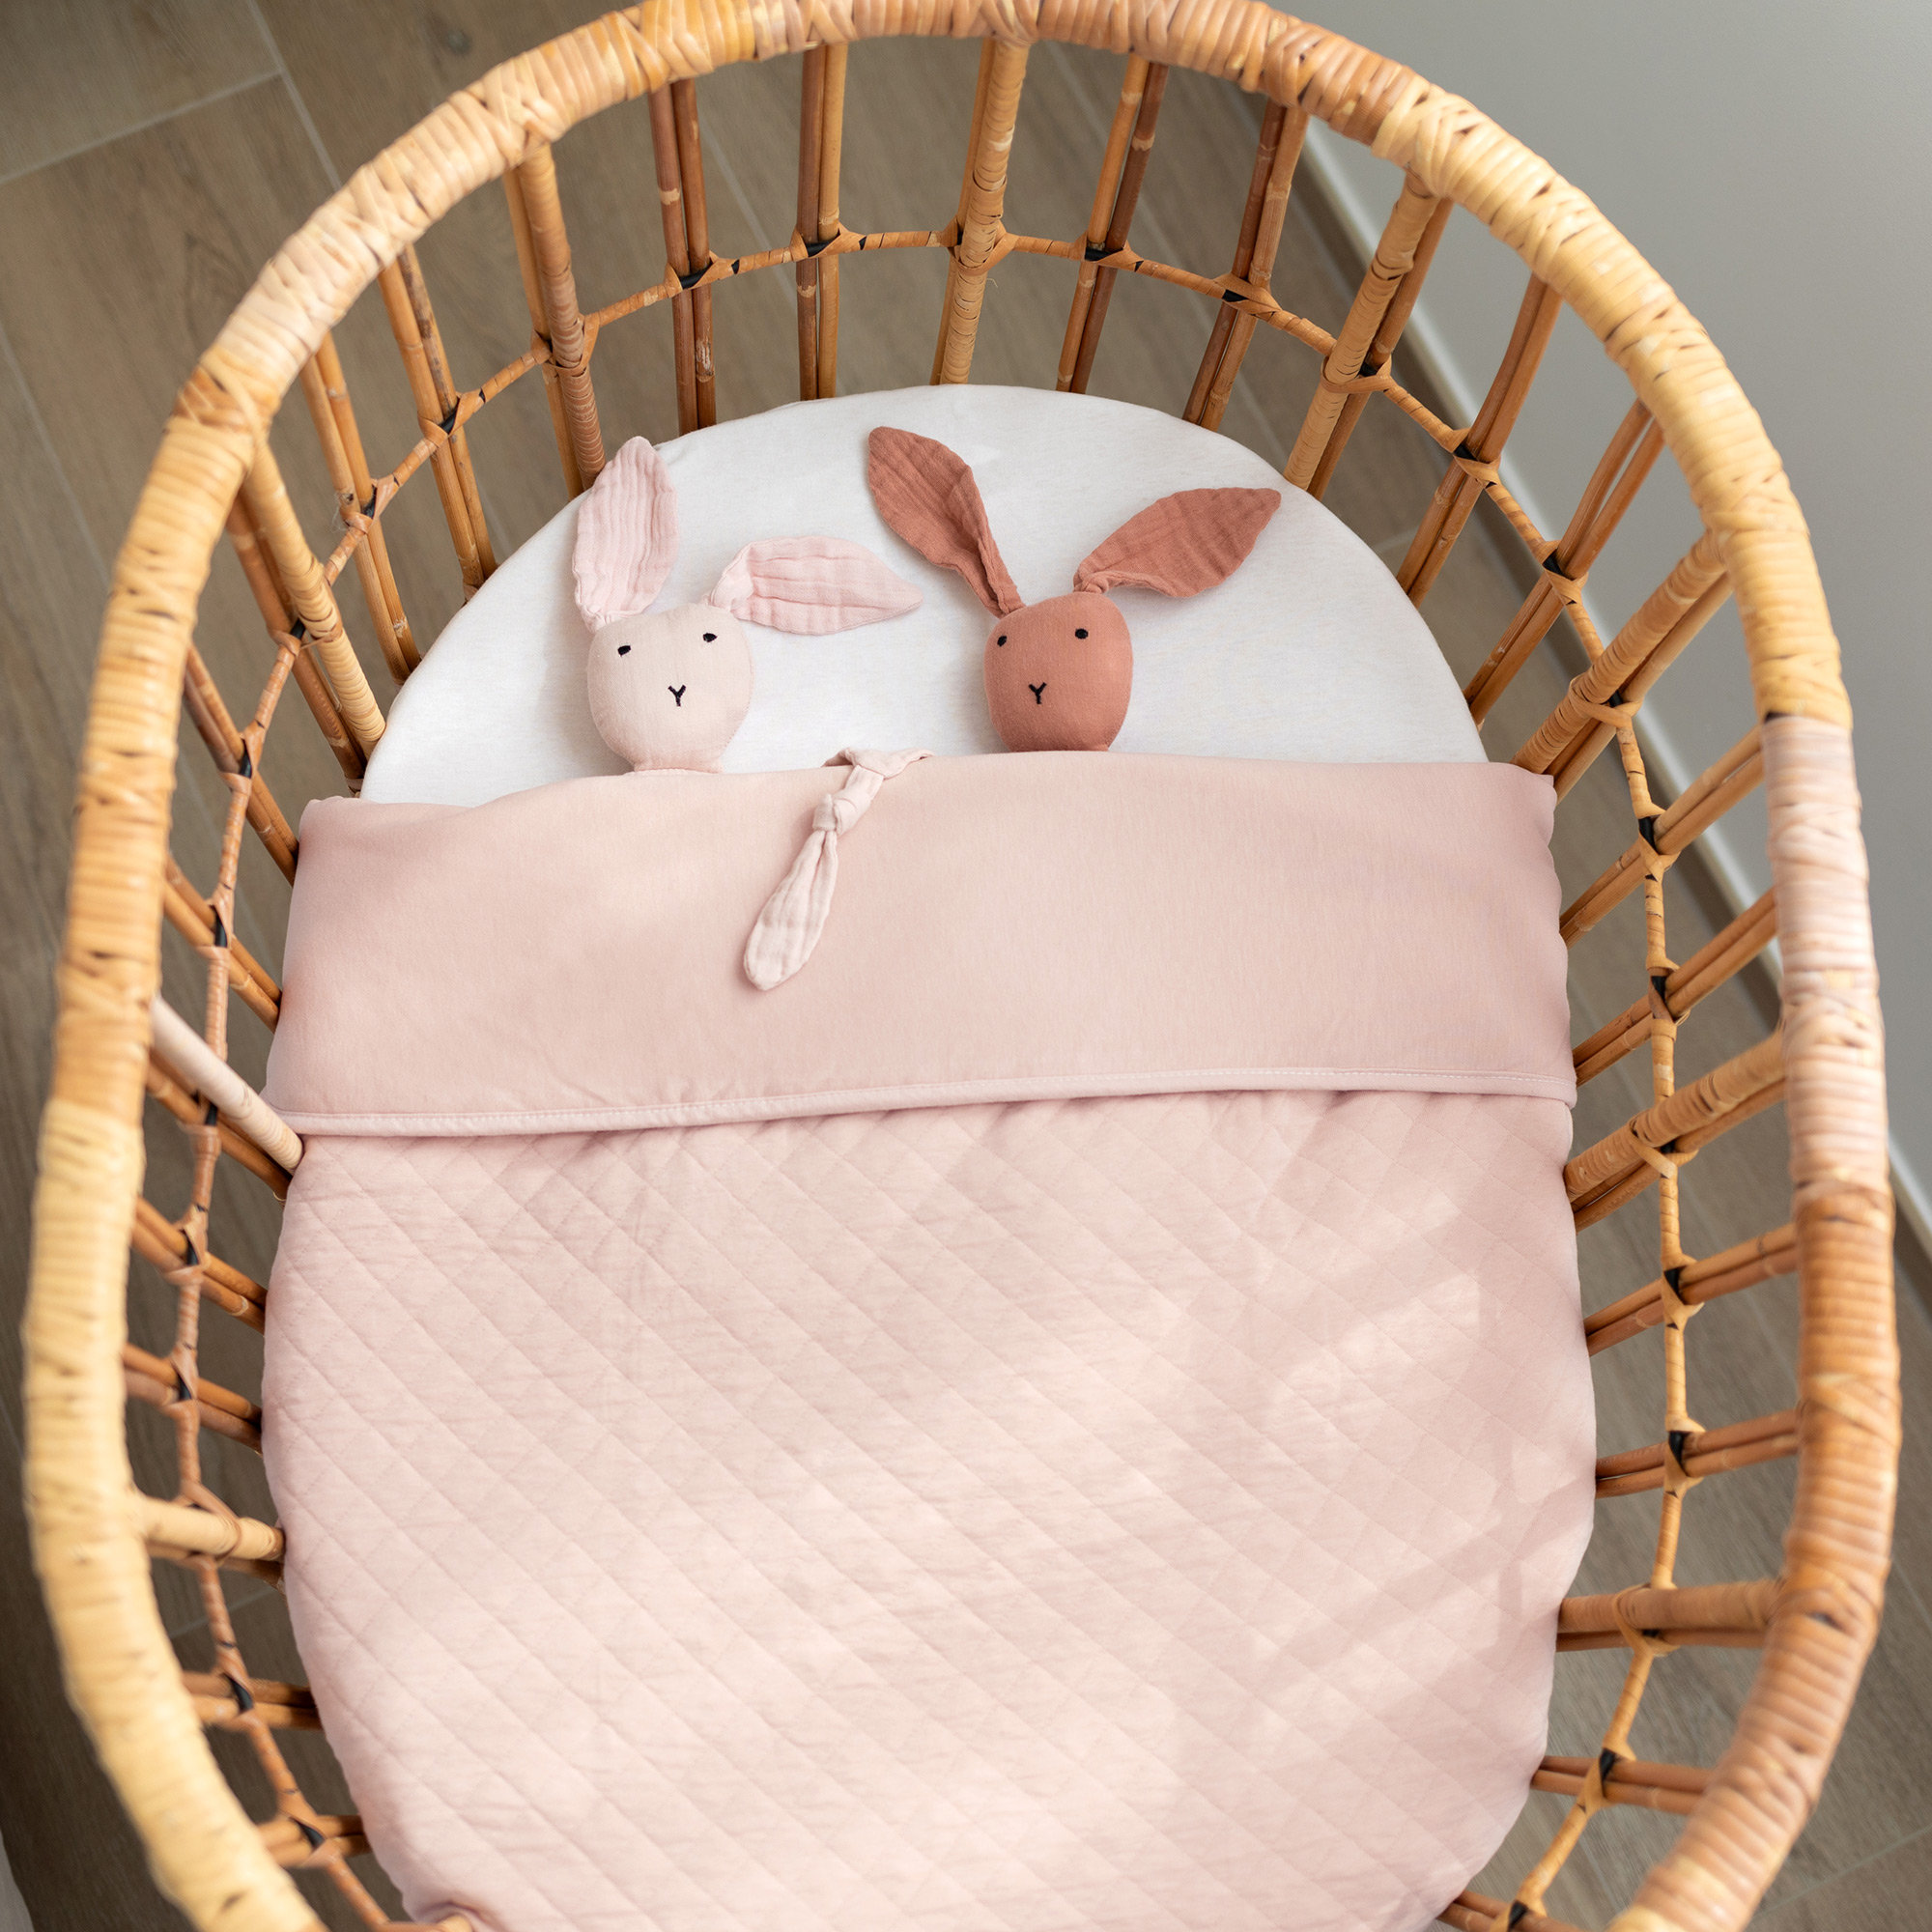 Blanket Pady quilted + jersey 75x100cm QUILT Blush tog 3[BEDDING]